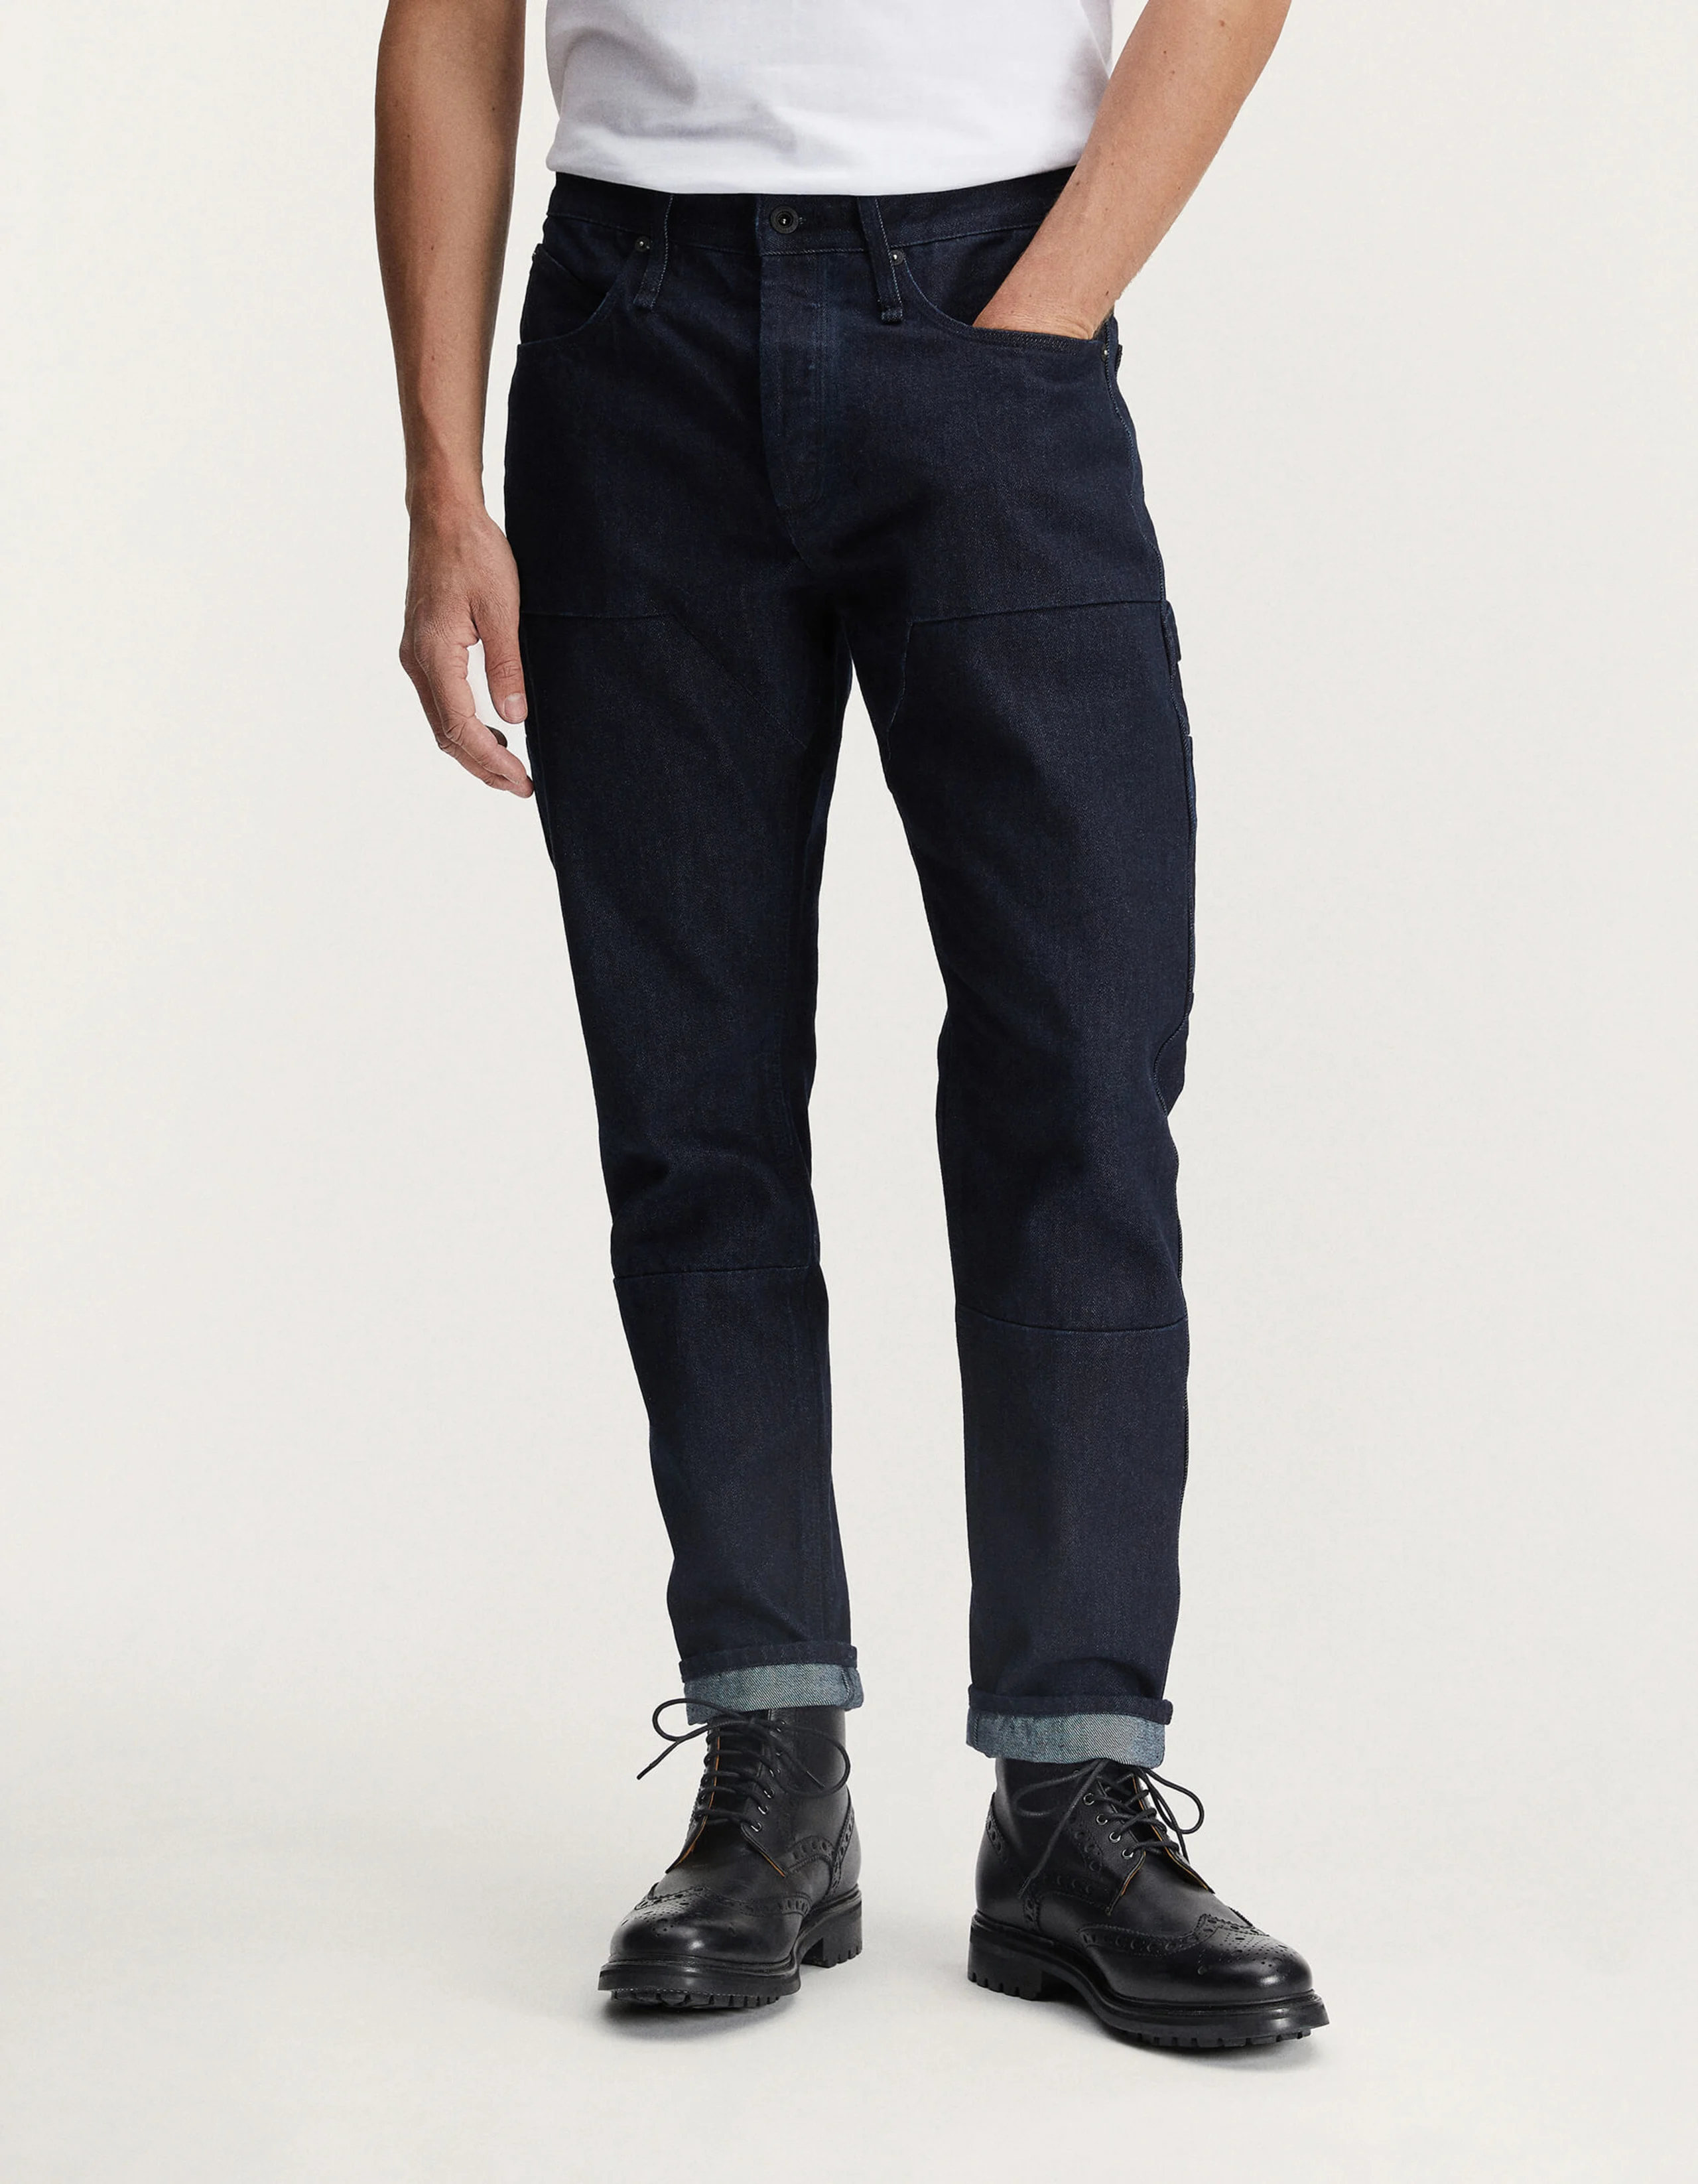 WORKER Authentic Denim TROUSERS